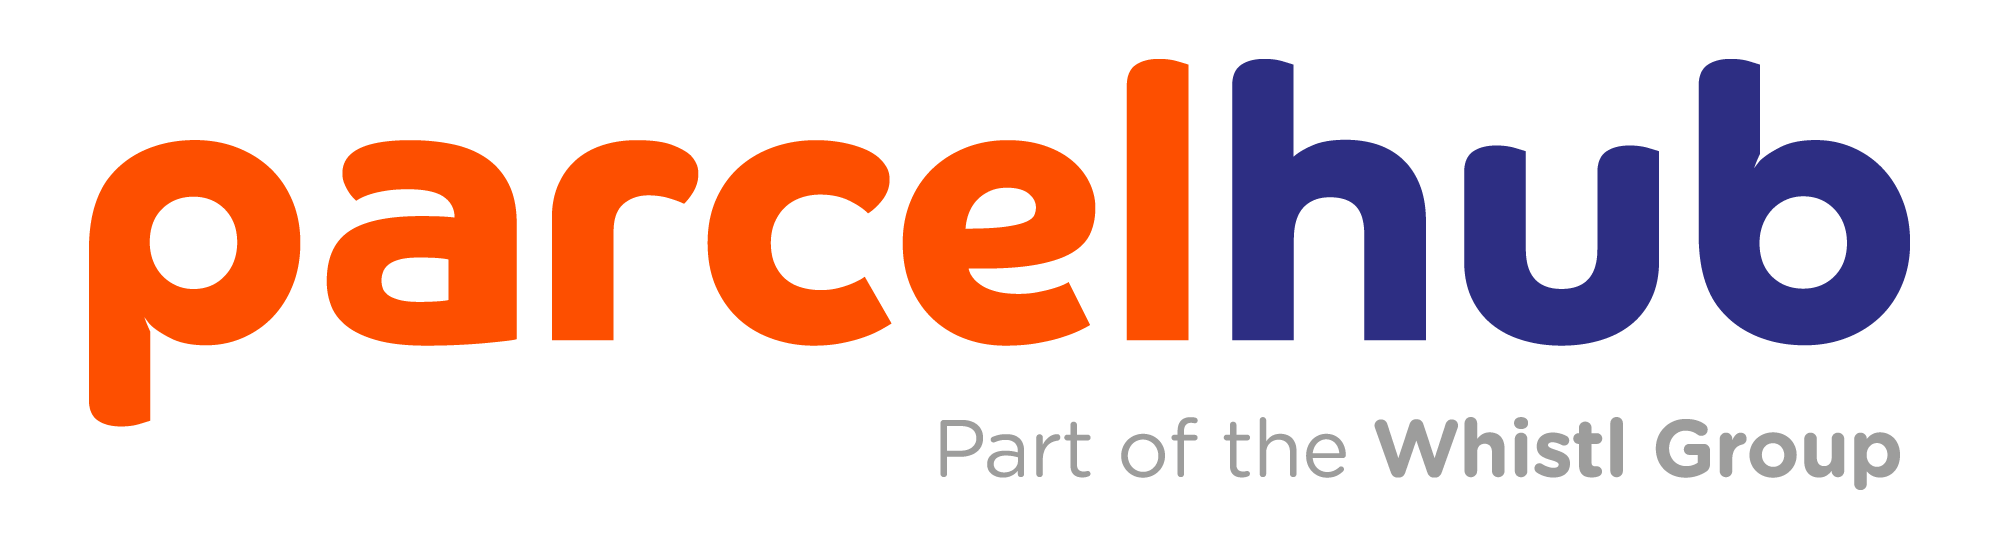 Parcelhub, part of the Whistl Group